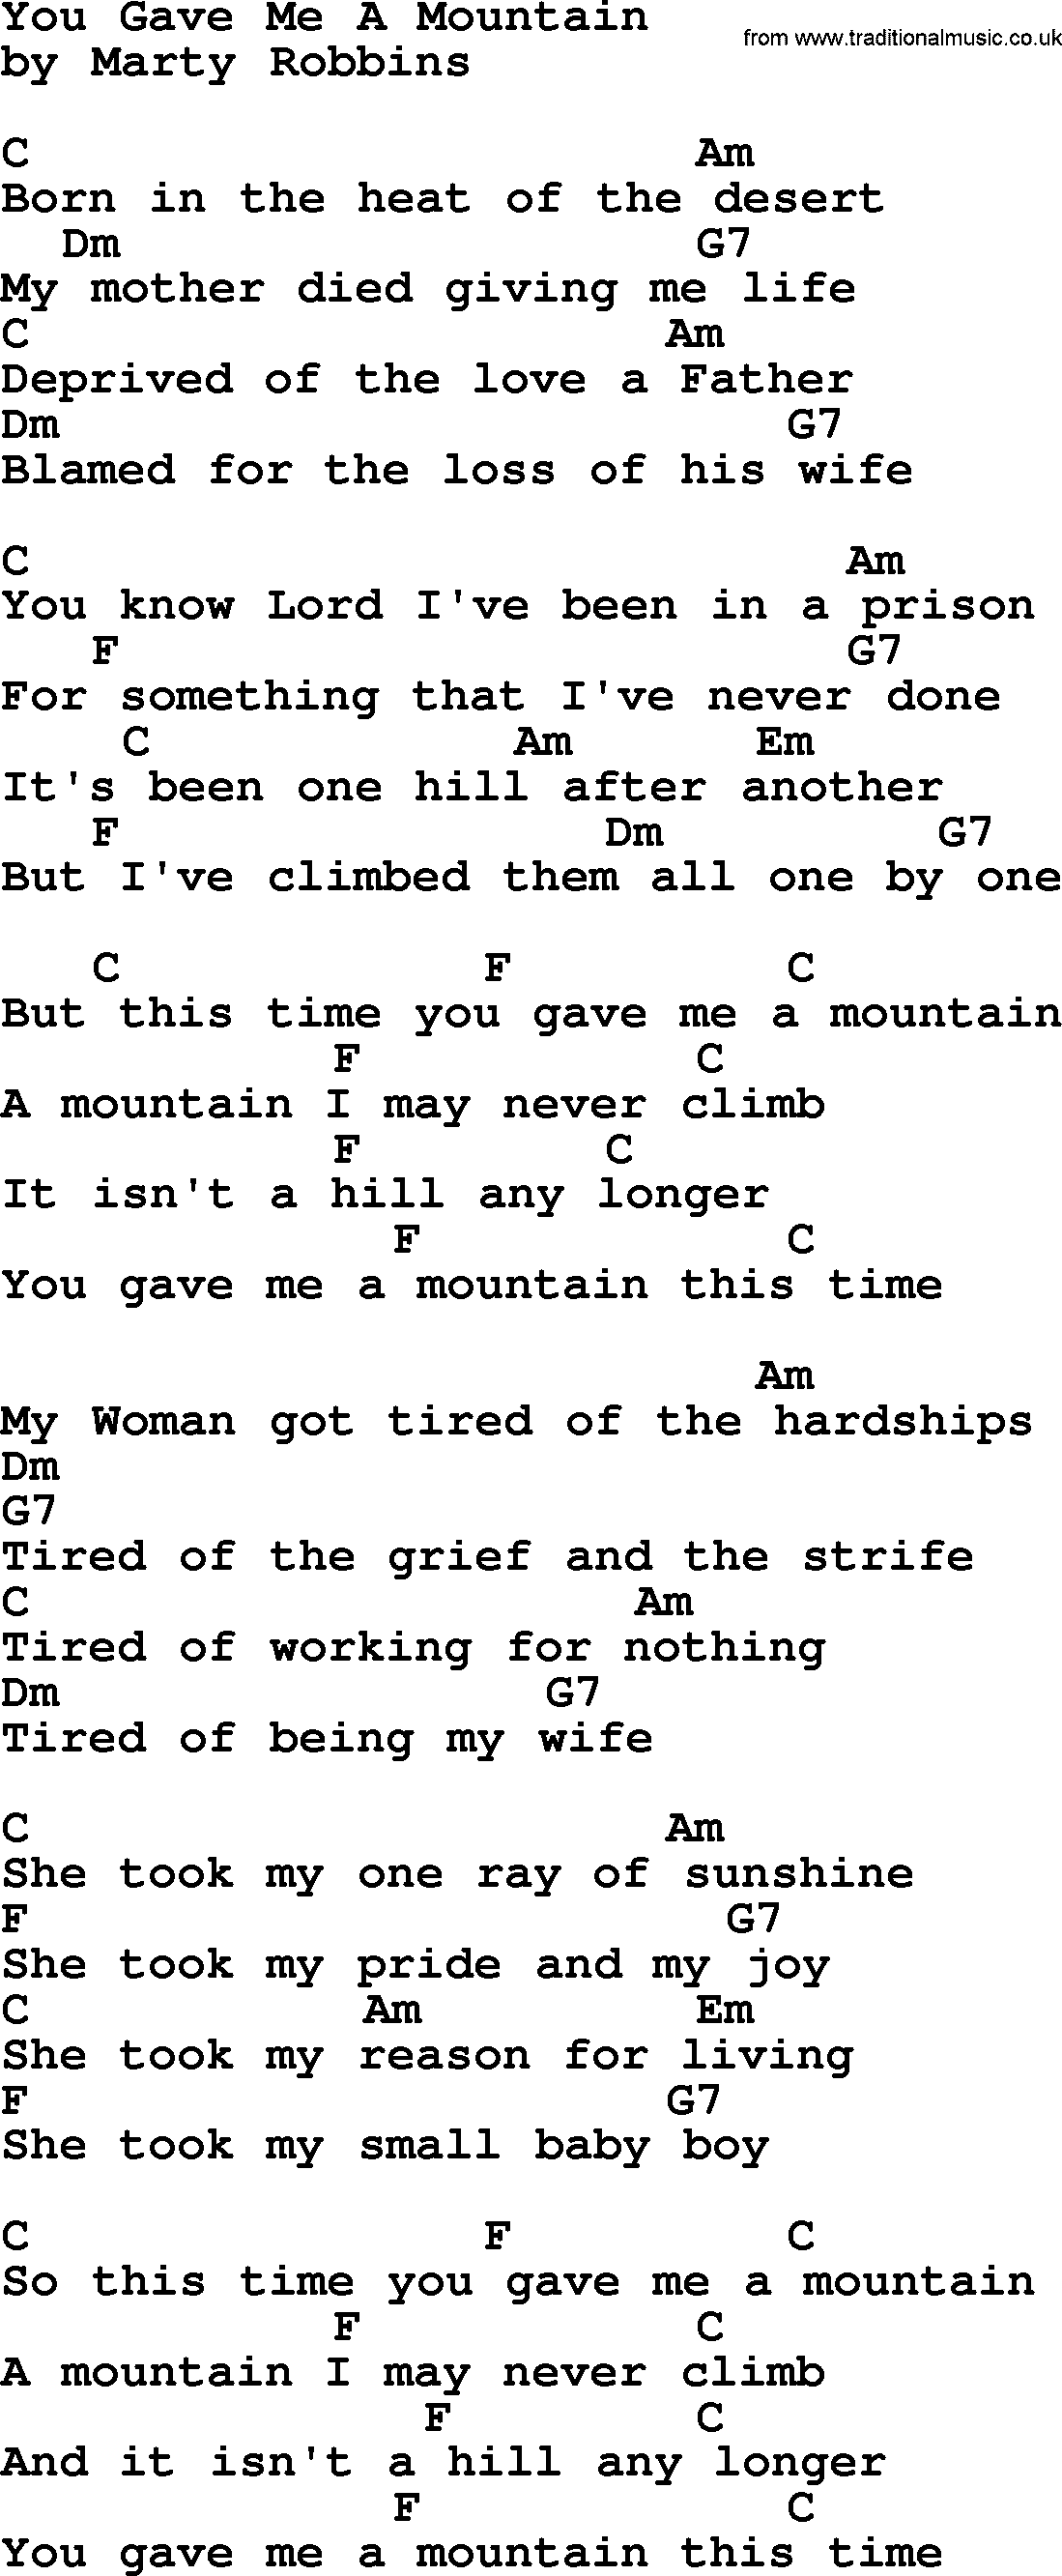 Marty Robbins song: You Gave Me A Mountain, lyrics and chords